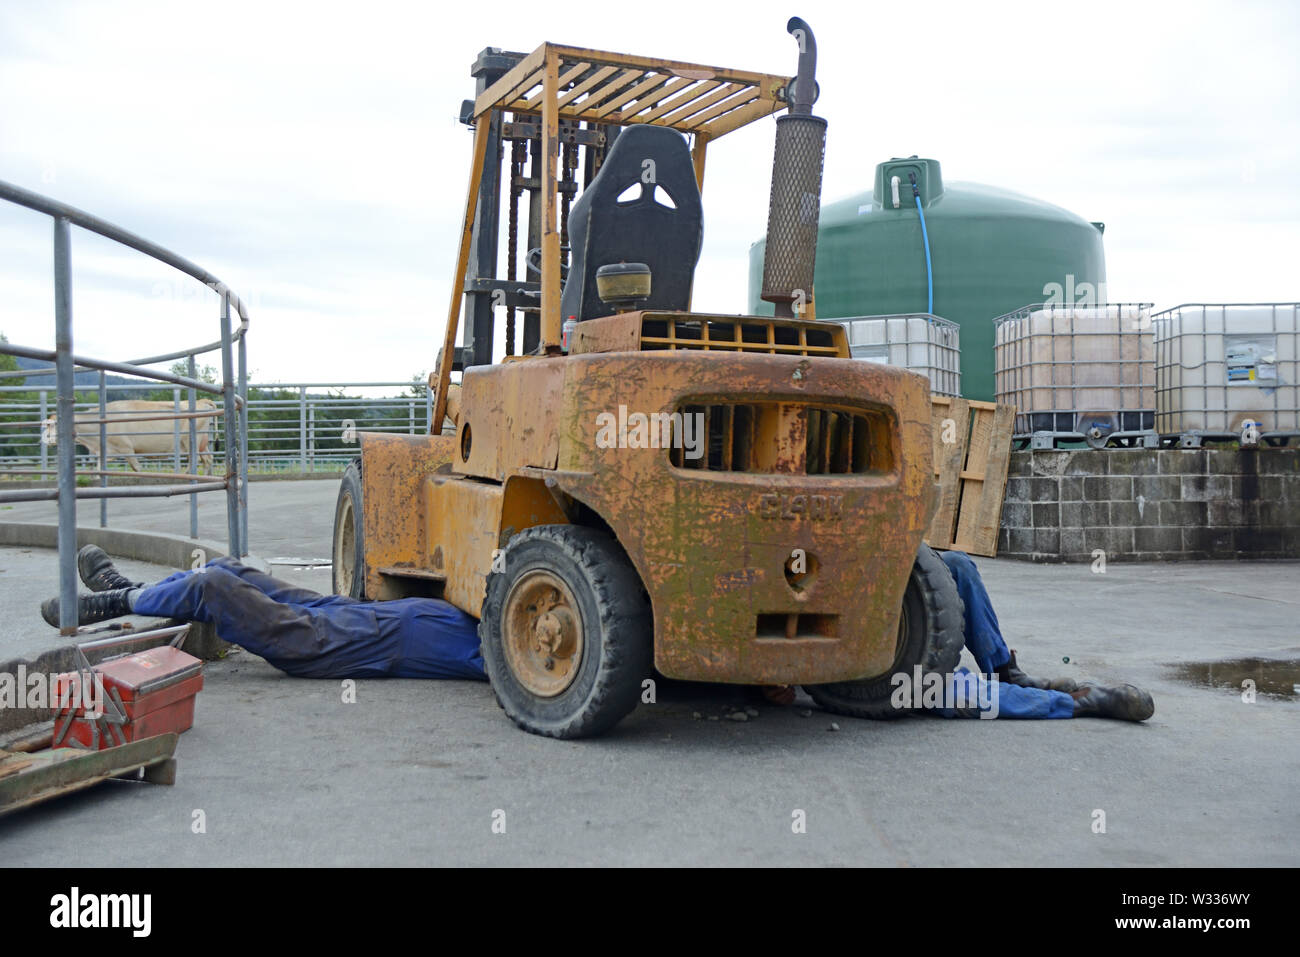 Two mechanics work underneath a forklift parked up at a dairy yard Stock Photo